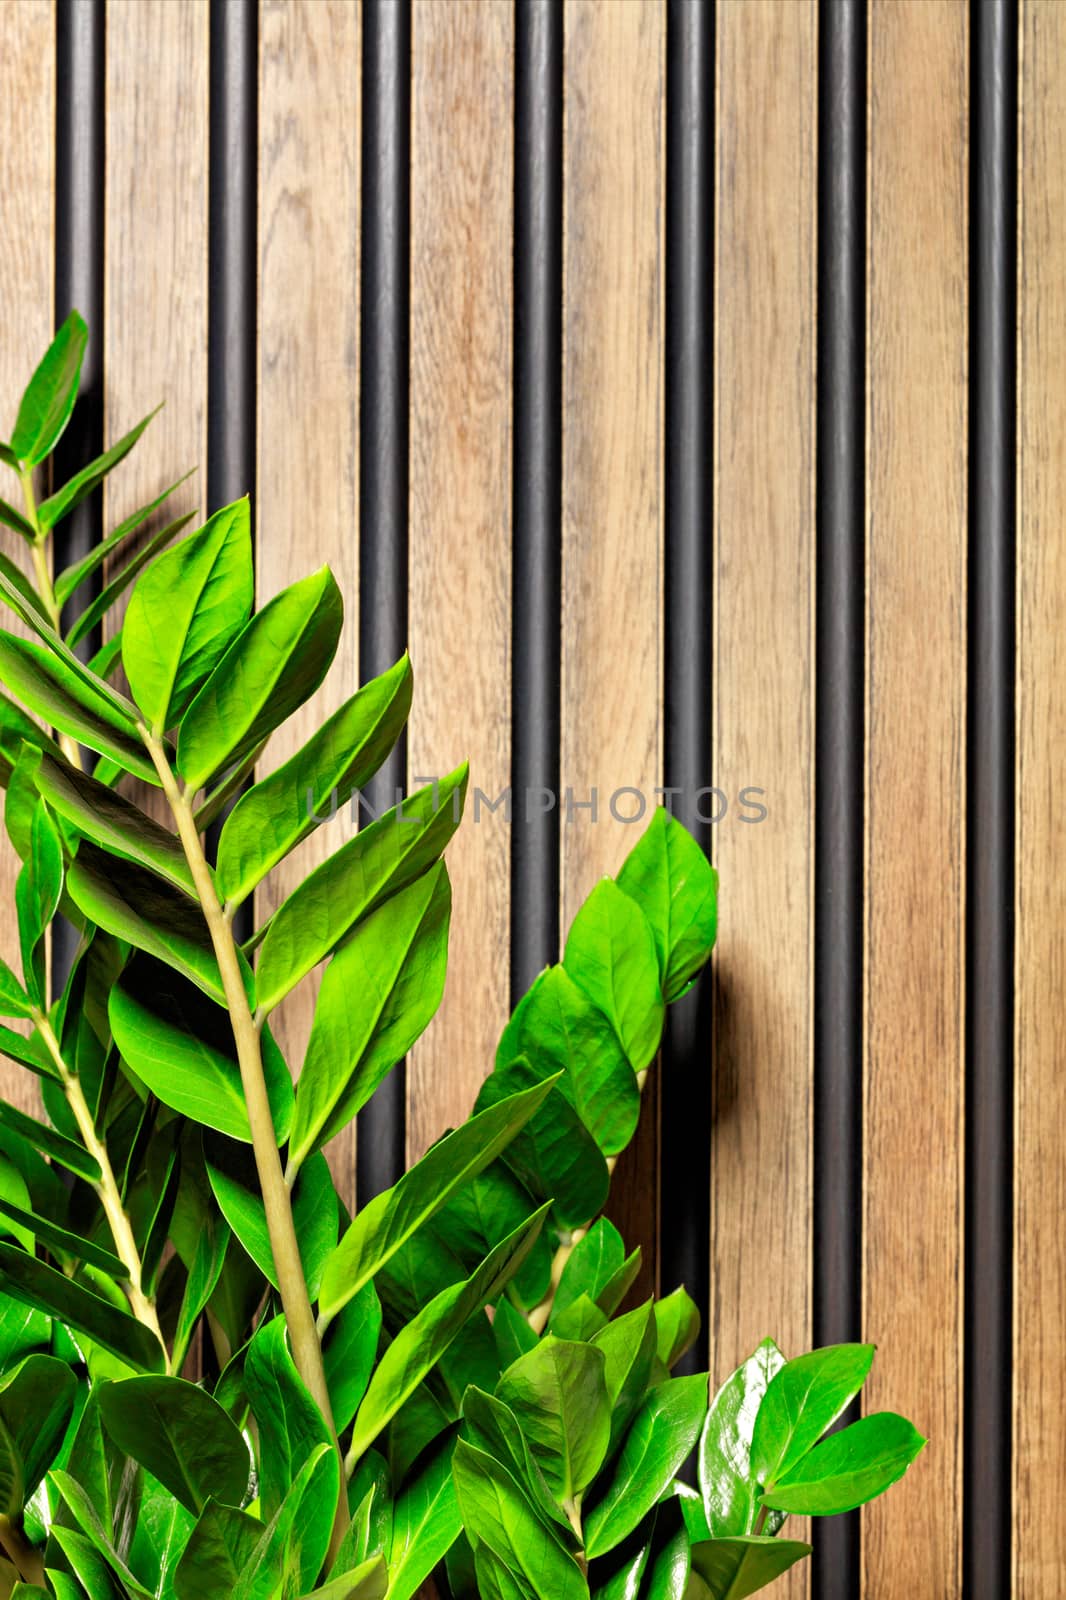 Stems and leaves of a dolar tree on the background of wooden vertical planks. by Sergii